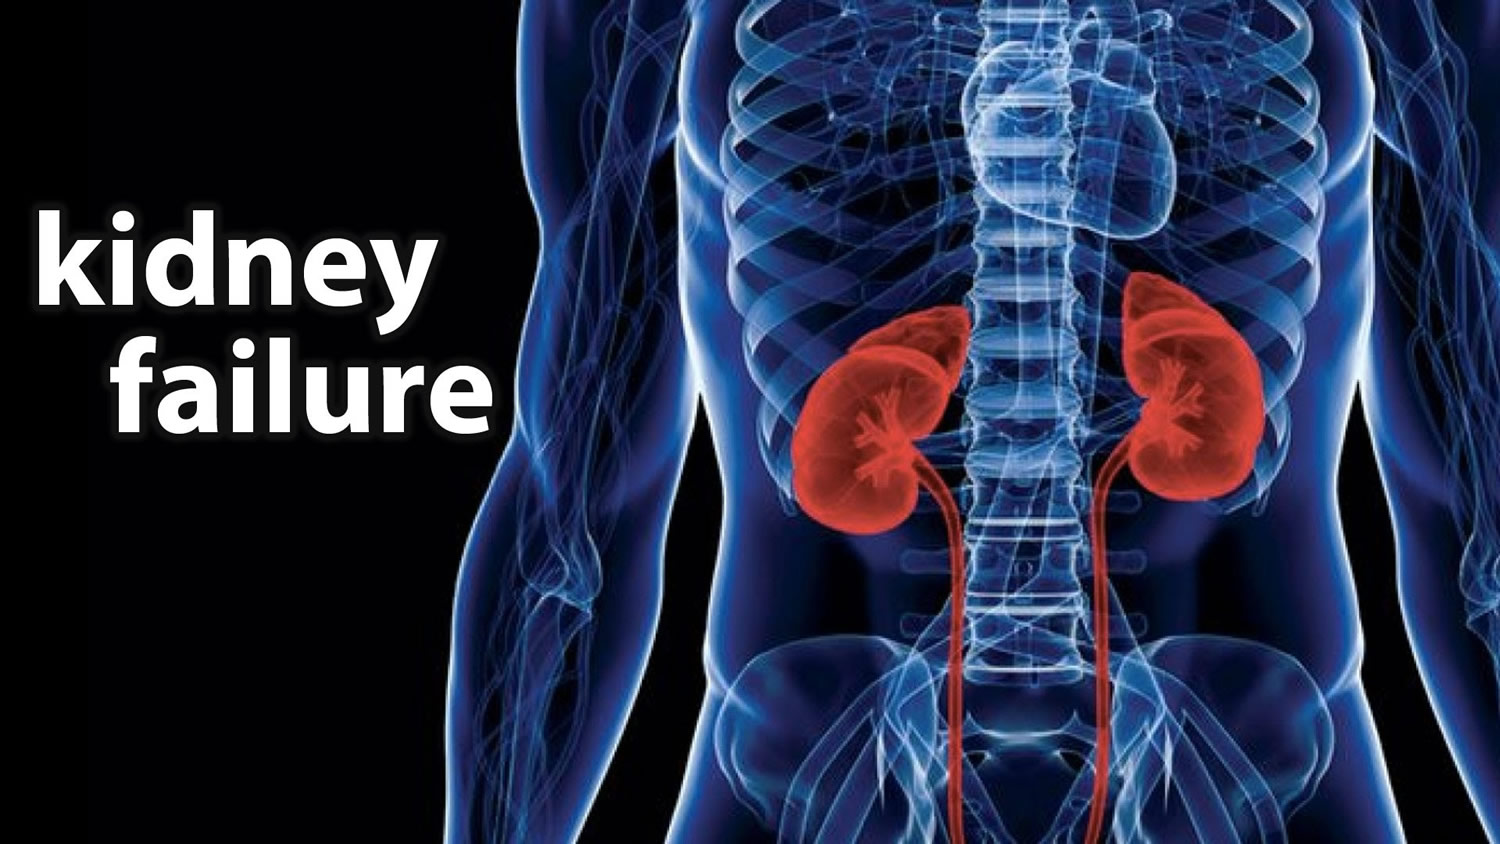 chronic kidney failure research papers